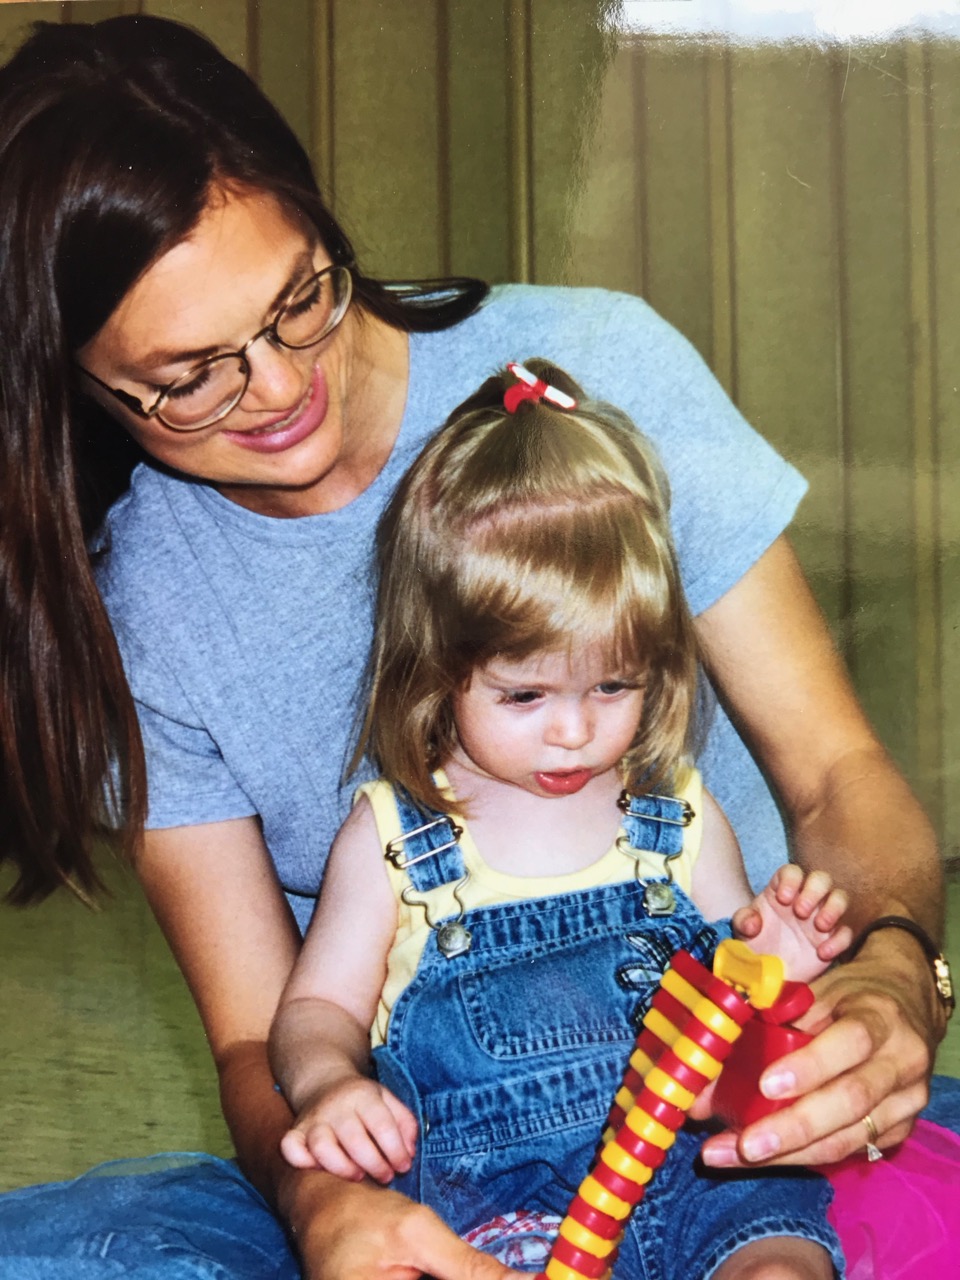 Caregiver holding a toddler in her lap while engaged with a yellow and red instrument